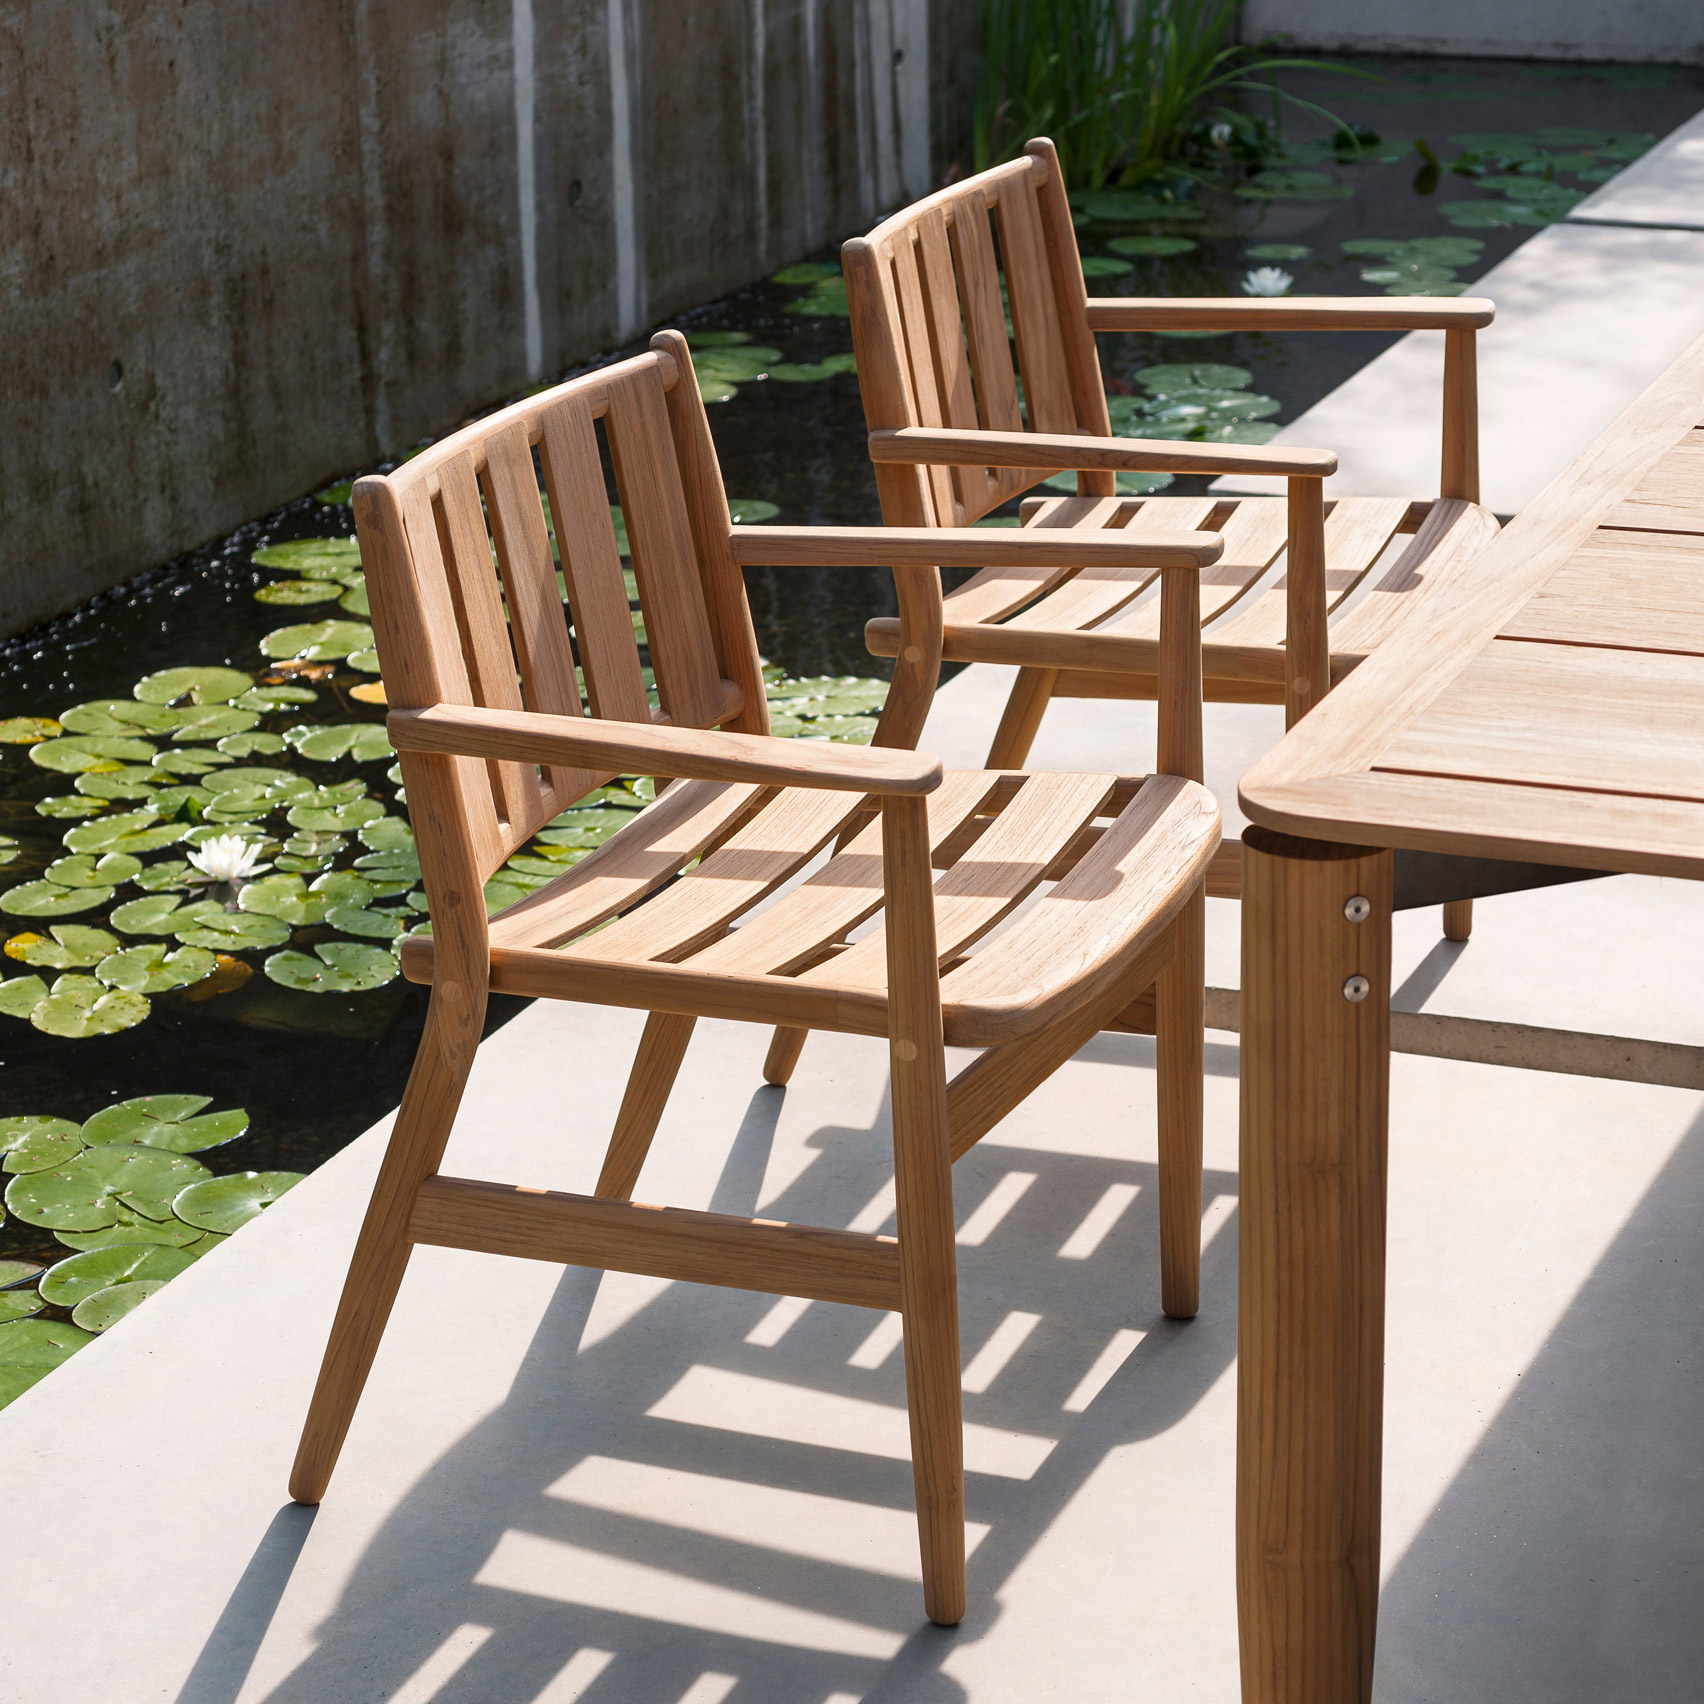 A pair of wooden outdoor dining chairs by Piero Lissoni